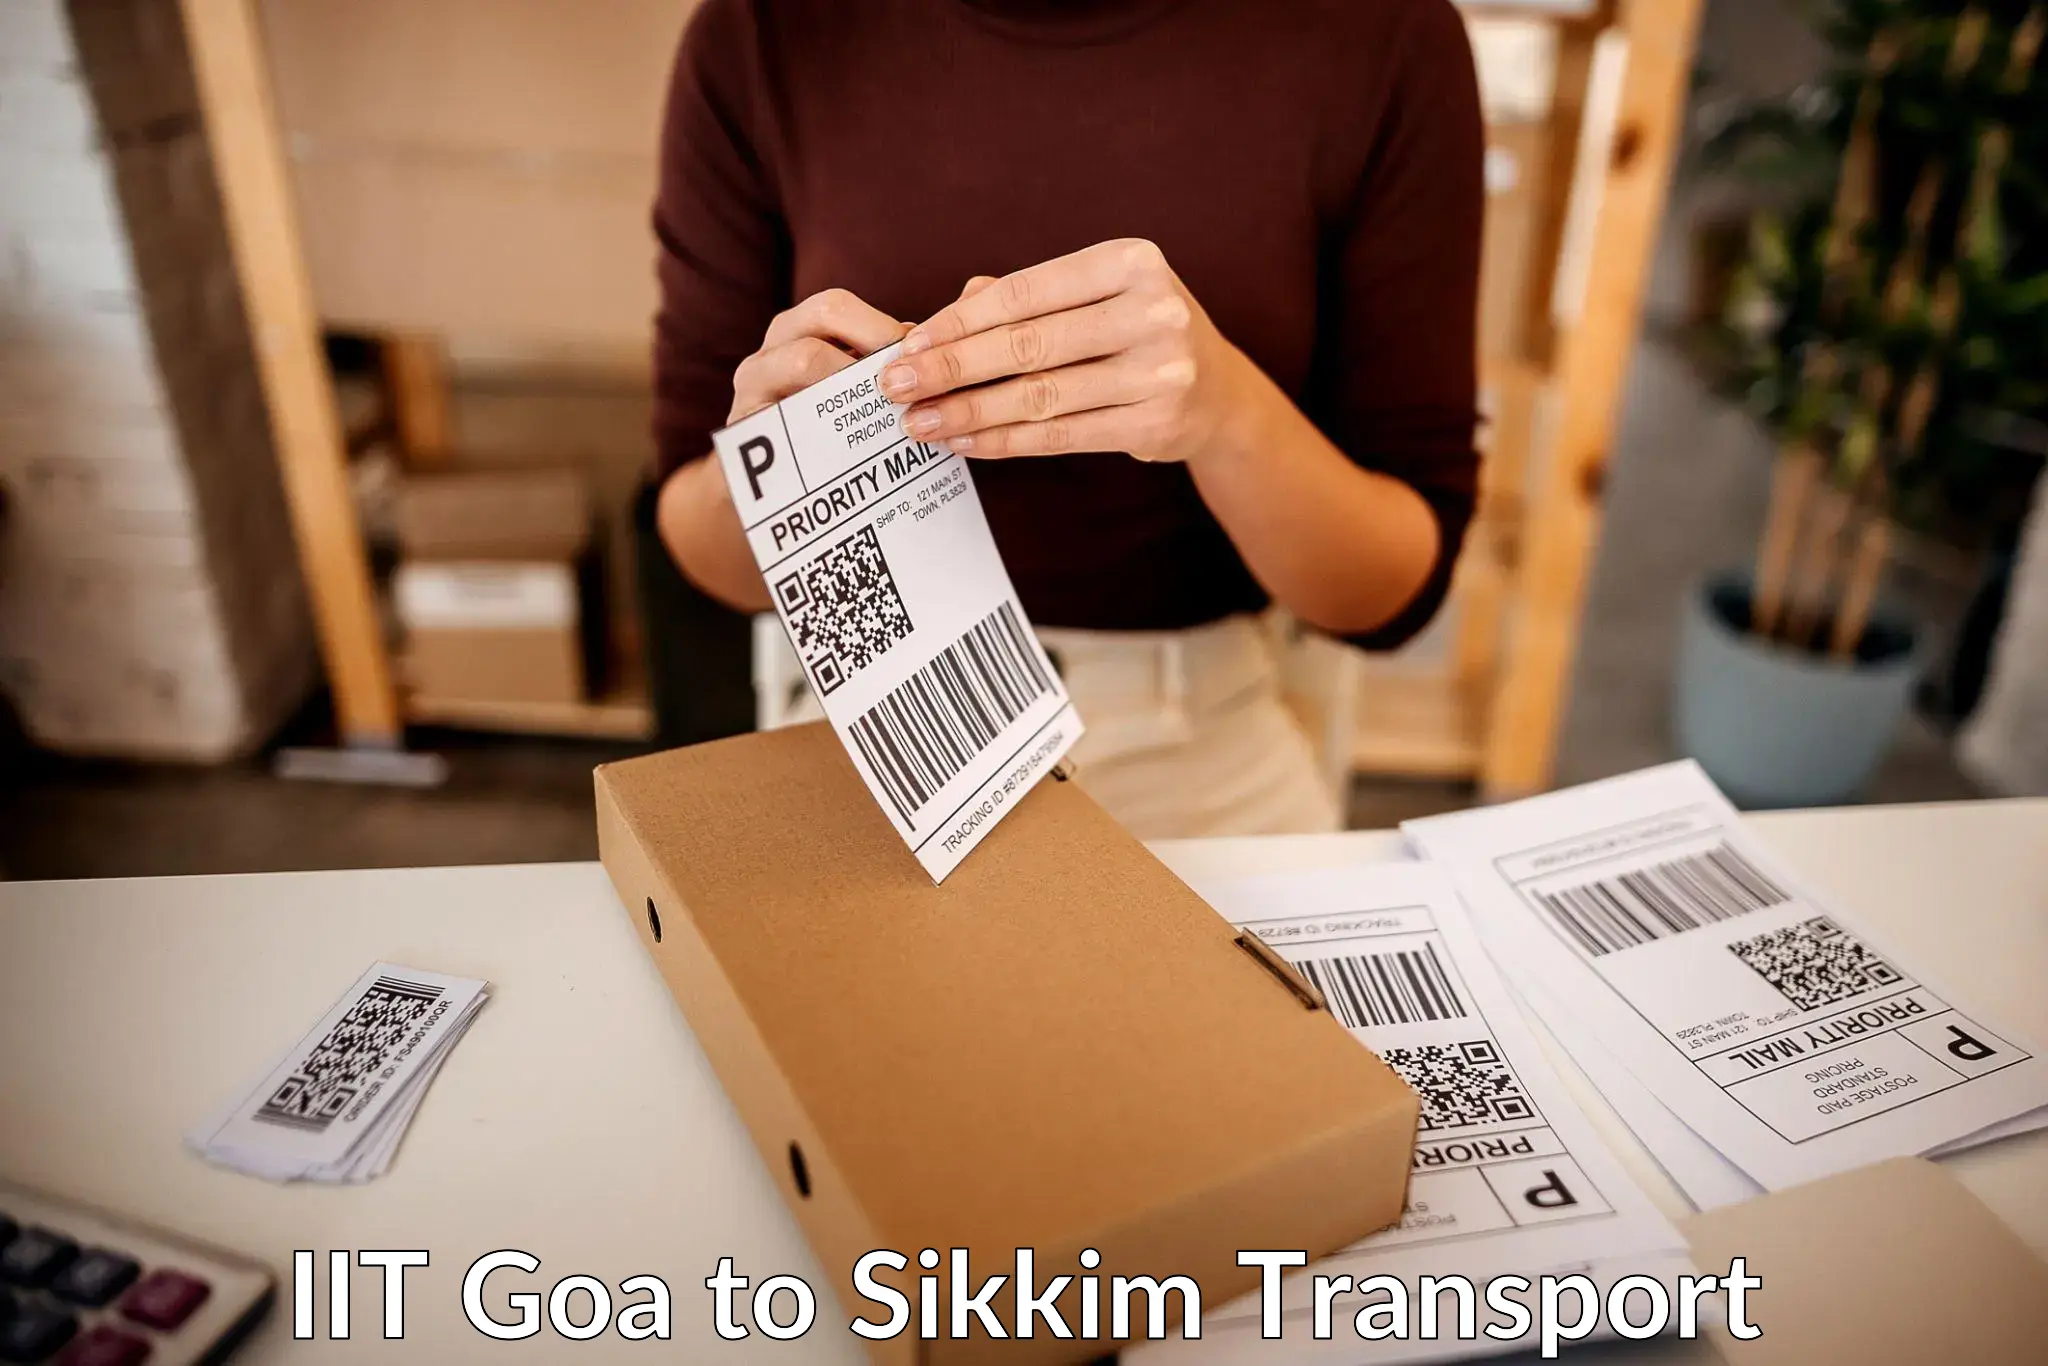 Cargo train transport services IIT Goa to South Sikkim